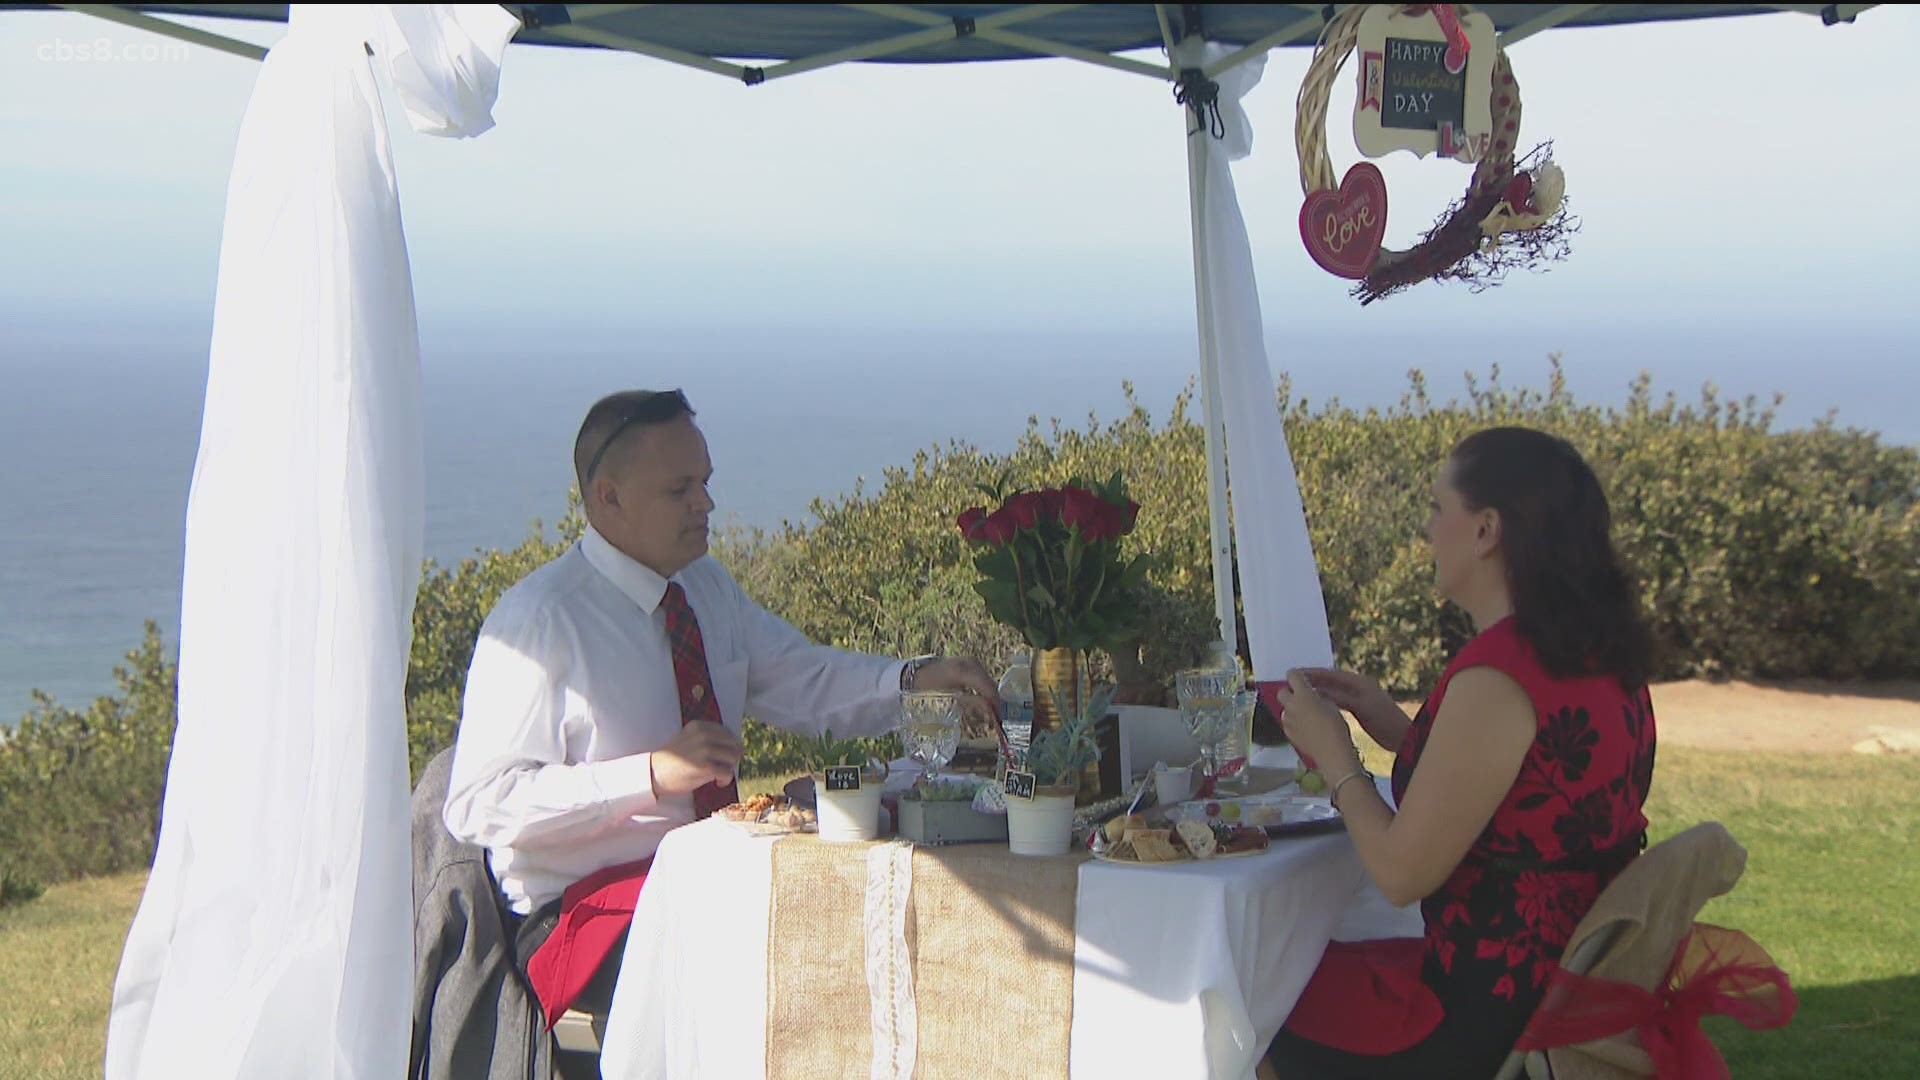 For Susan Monroe’s dedication and service to her employer AMR, a picnic was given to the happy couple under the blue sky of La Jolla.